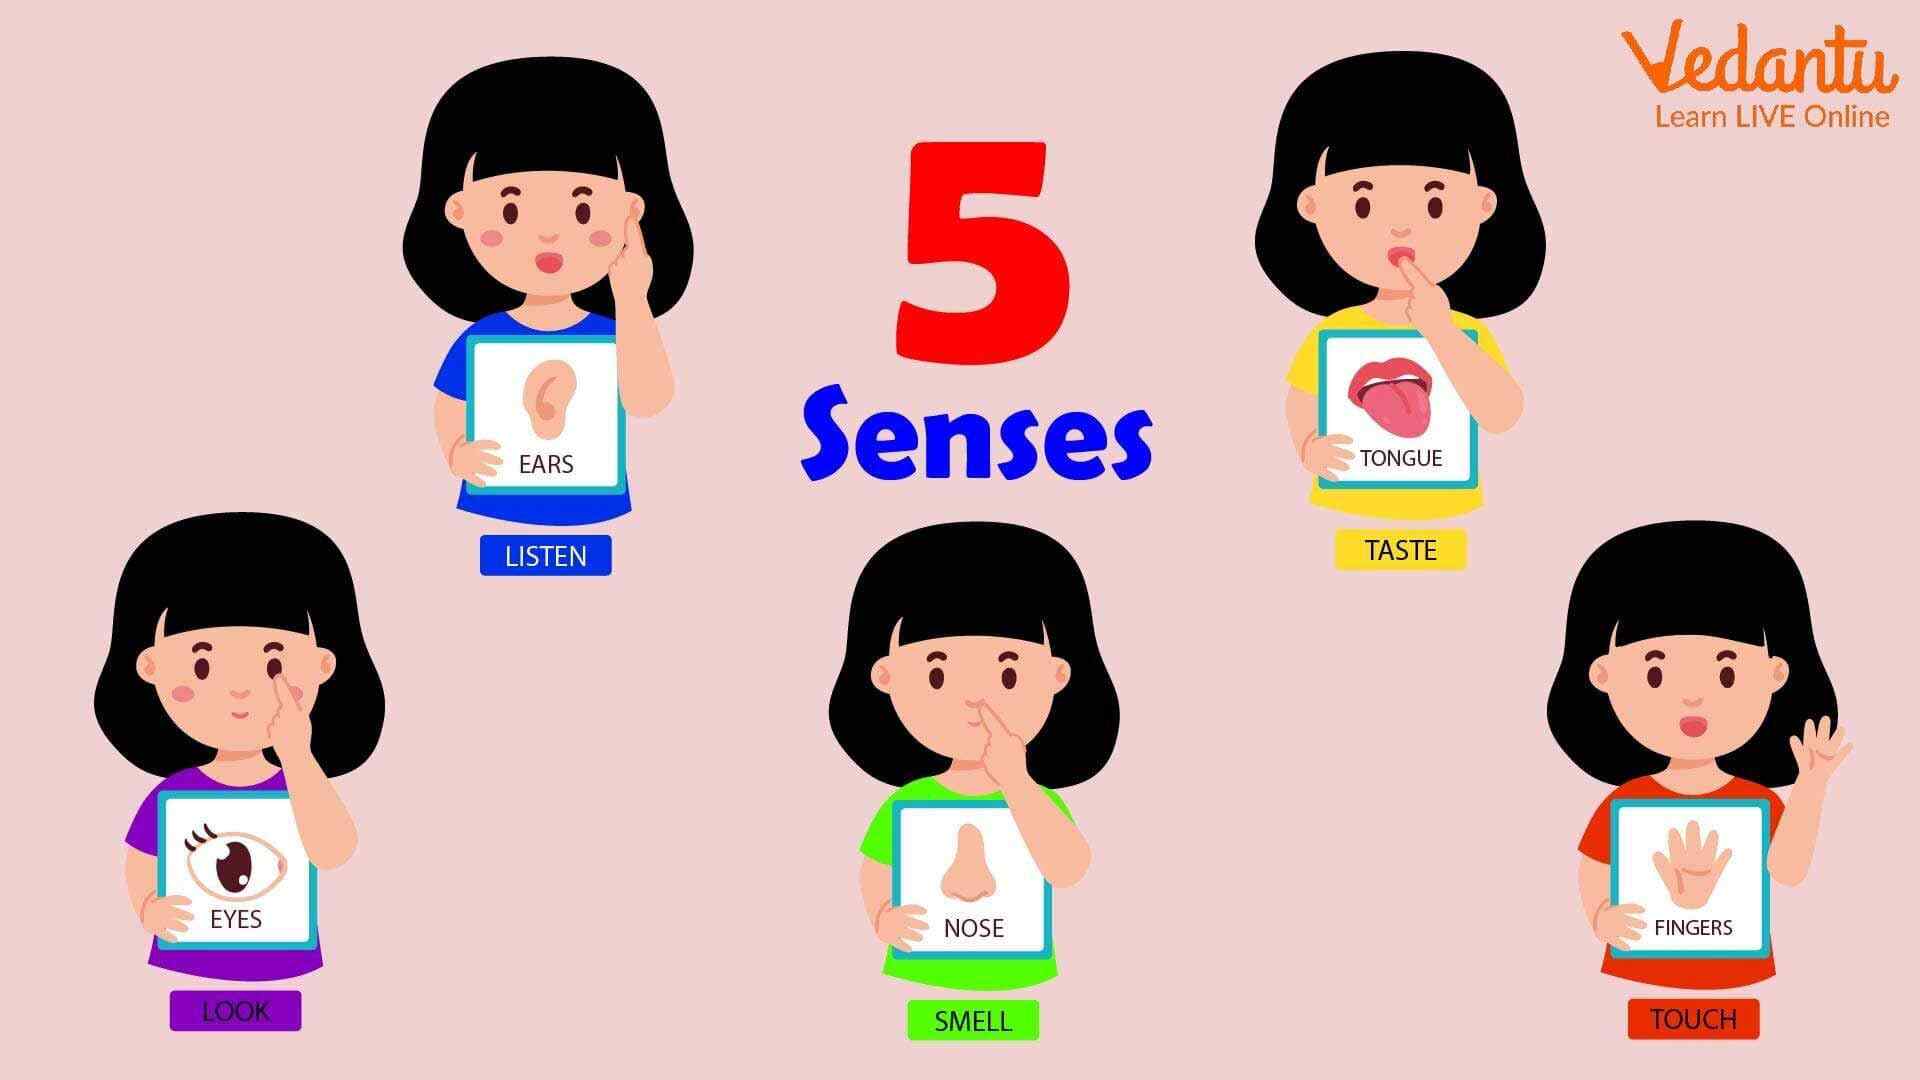 Five sense organs images with name